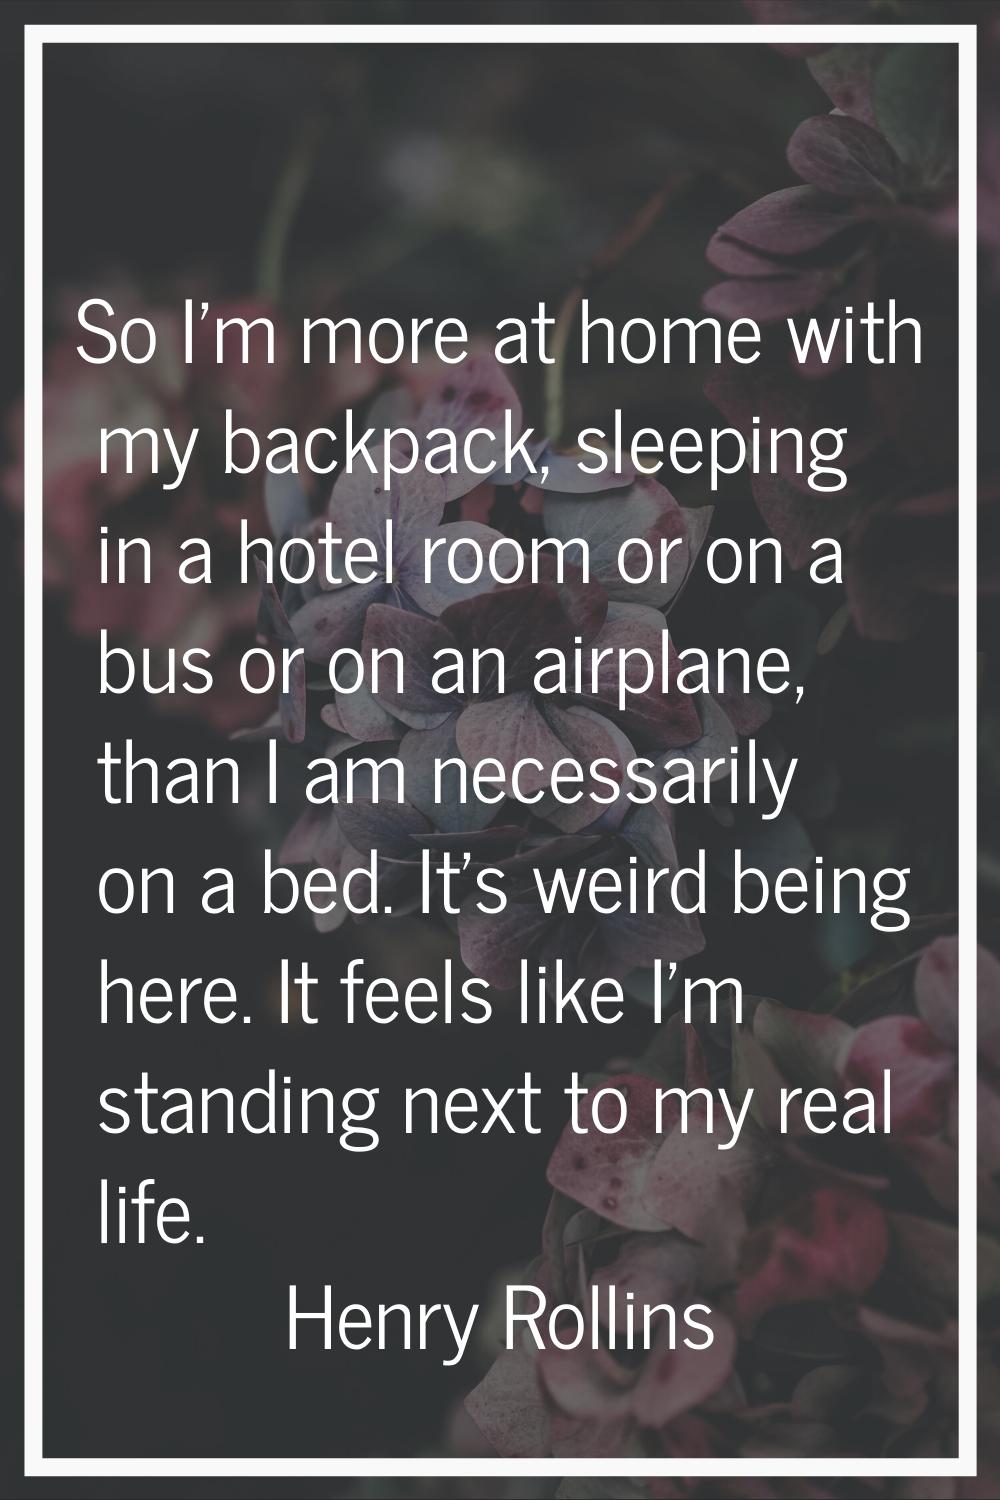 So I'm more at home with my backpack, sleeping in a hotel room or on a bus or on an airplane, than 